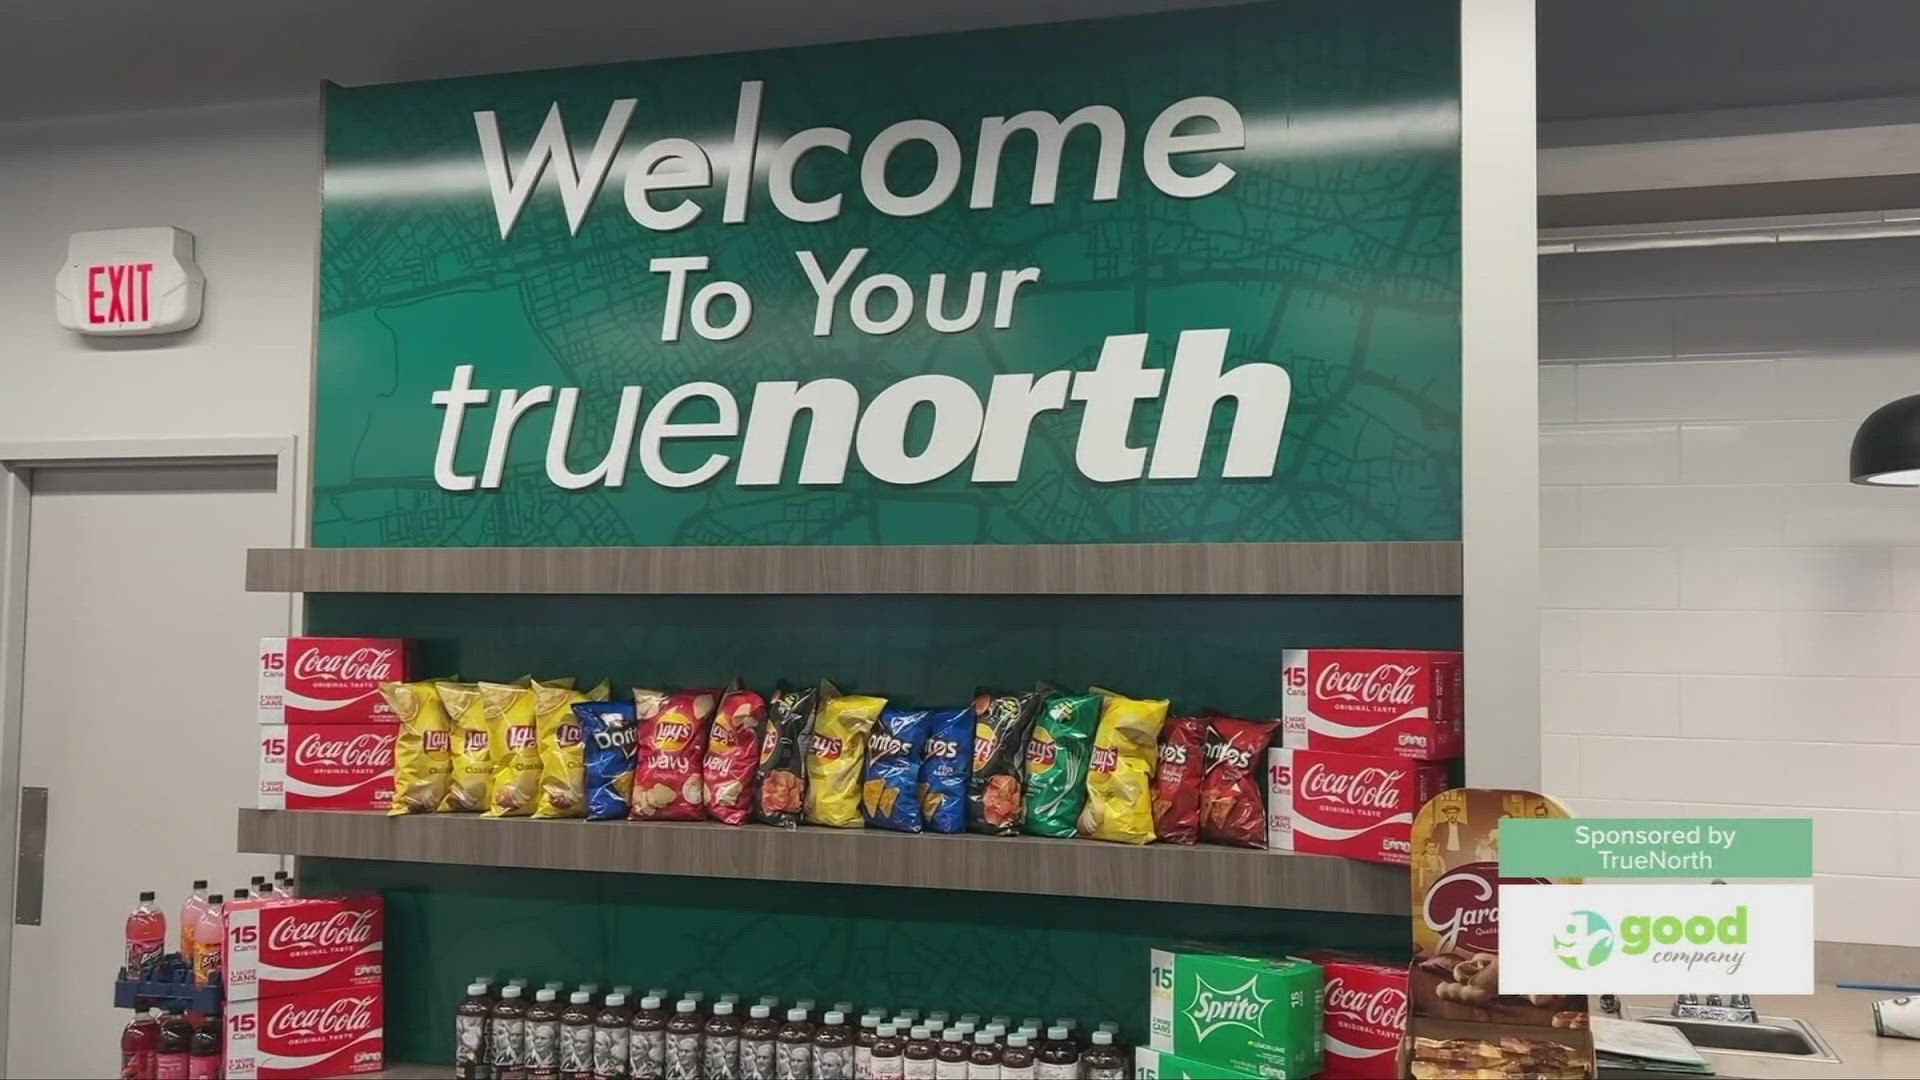 Joe takes a trip to Westlake to give away some gift cards at the local TrueNorth! Sponsored by: TrueNorth